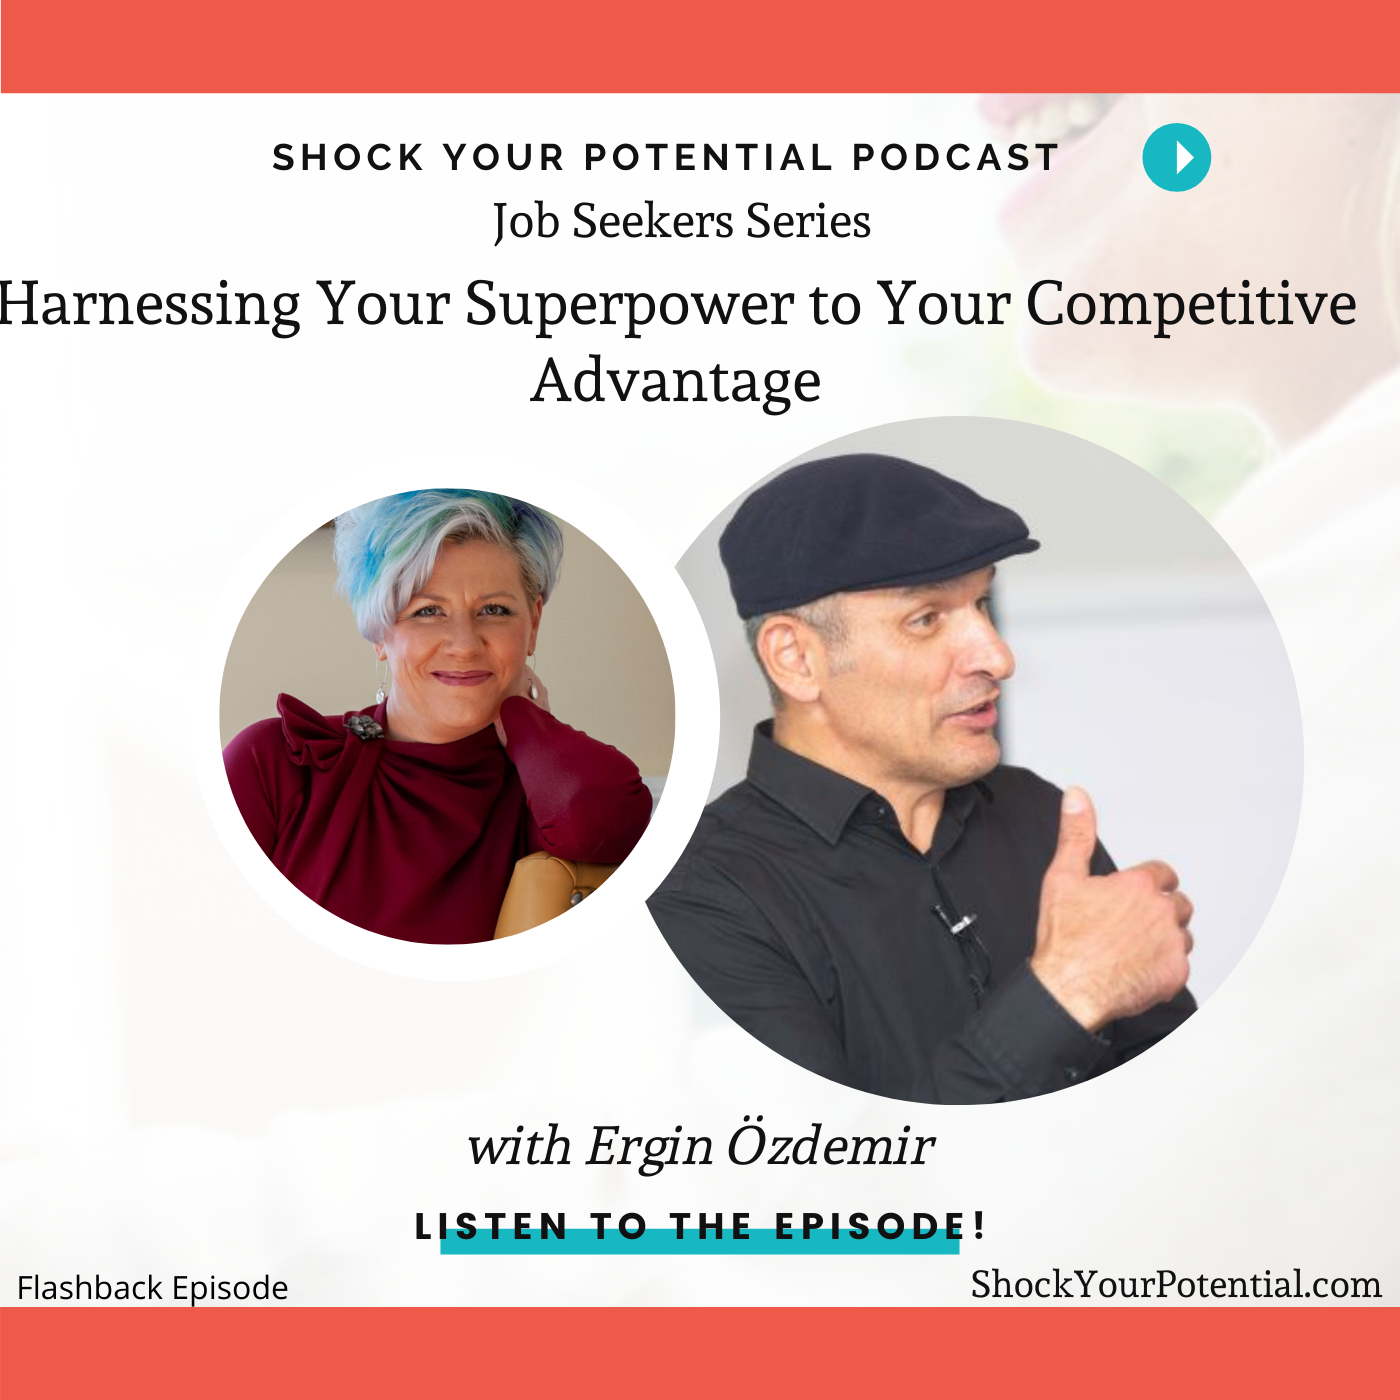 Harnessing Your Superpower to Your Competitive Advantage – Ergin Özdemir